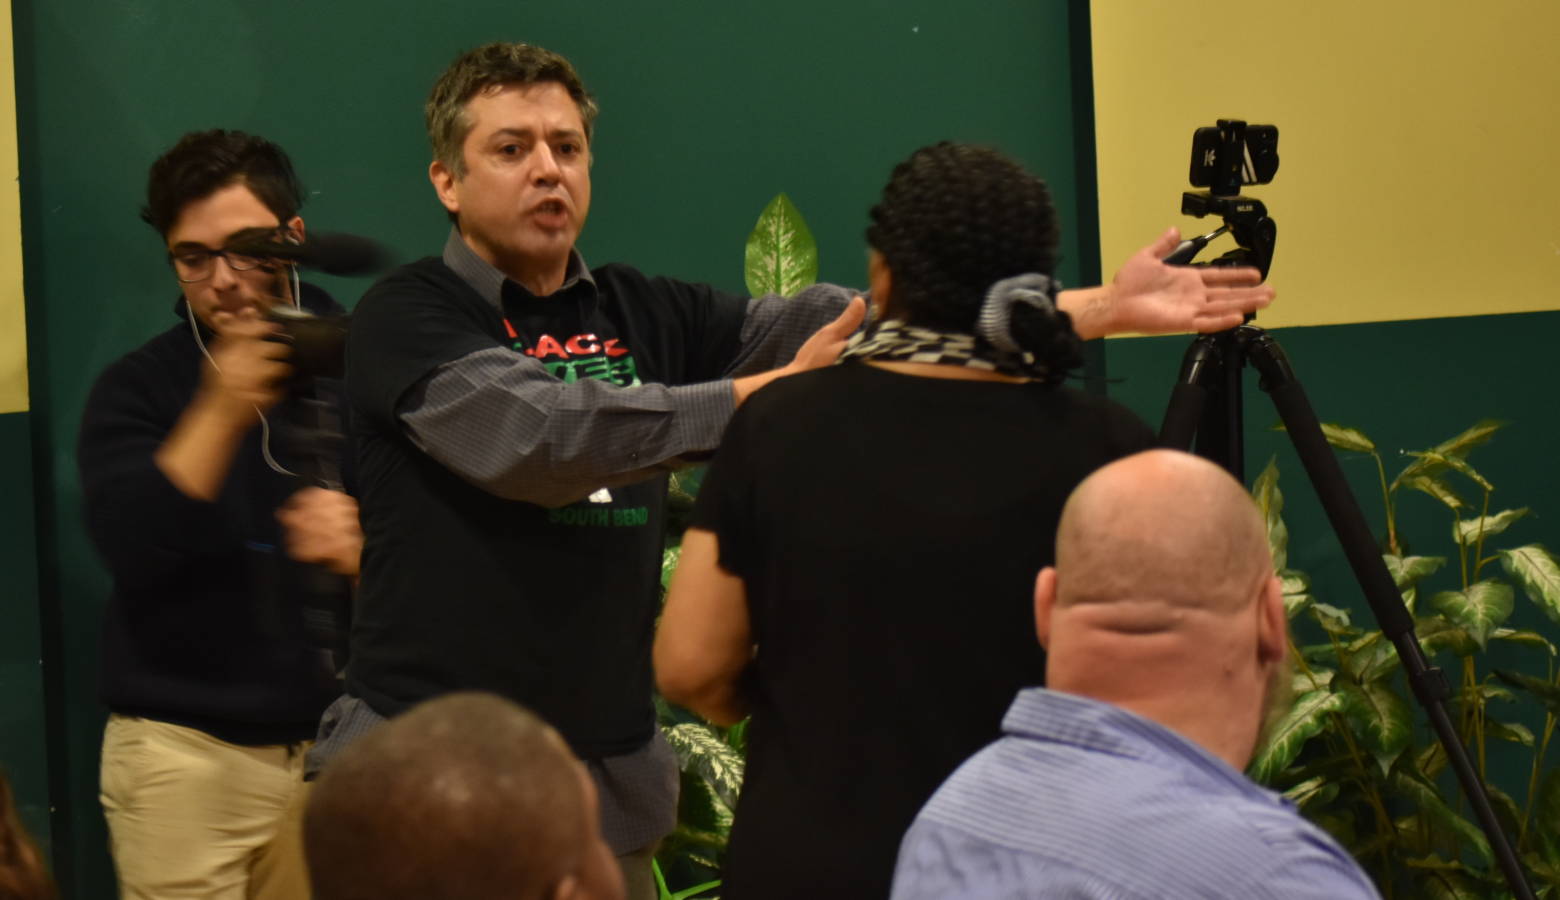 Igor Rodriguez, a protestor, disrupted an event for African American community leaders to show support for Mayor Pete Buttigieg. (Justin Hicks/IPB News)